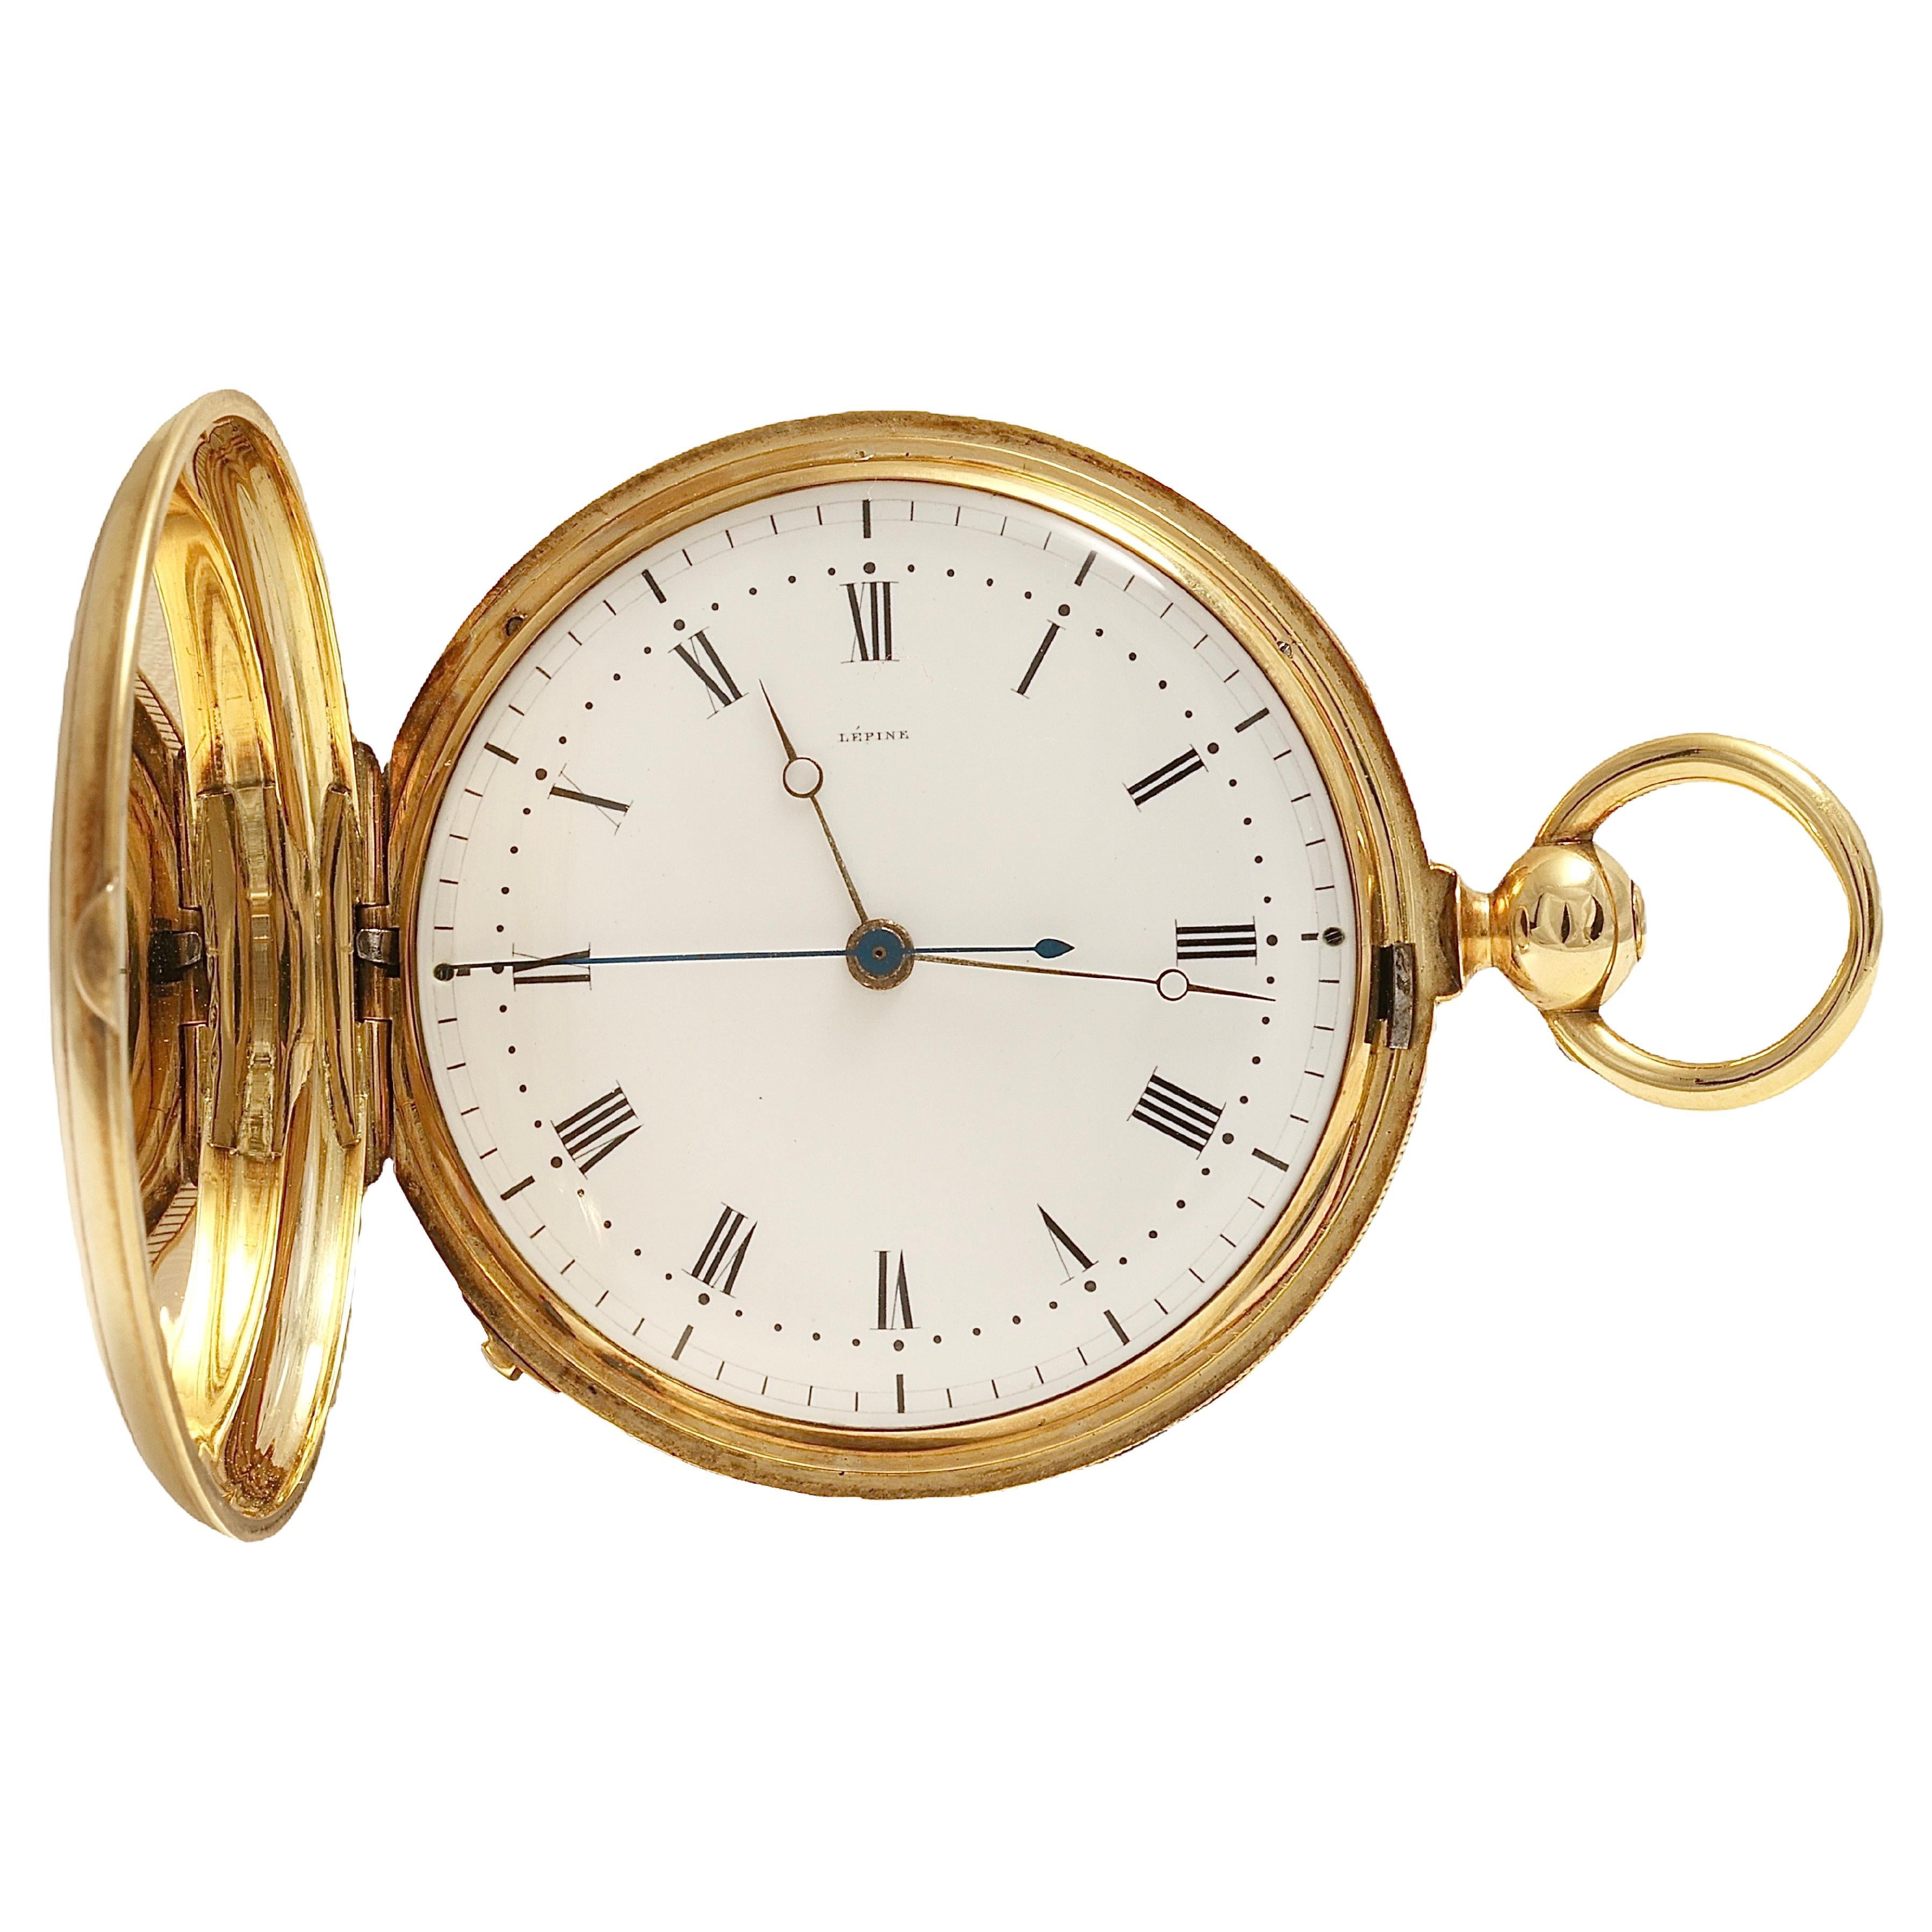 18 Kt Yellow Gold Lepine Pocket Watch, Second Morte, Double Barrel, Collector